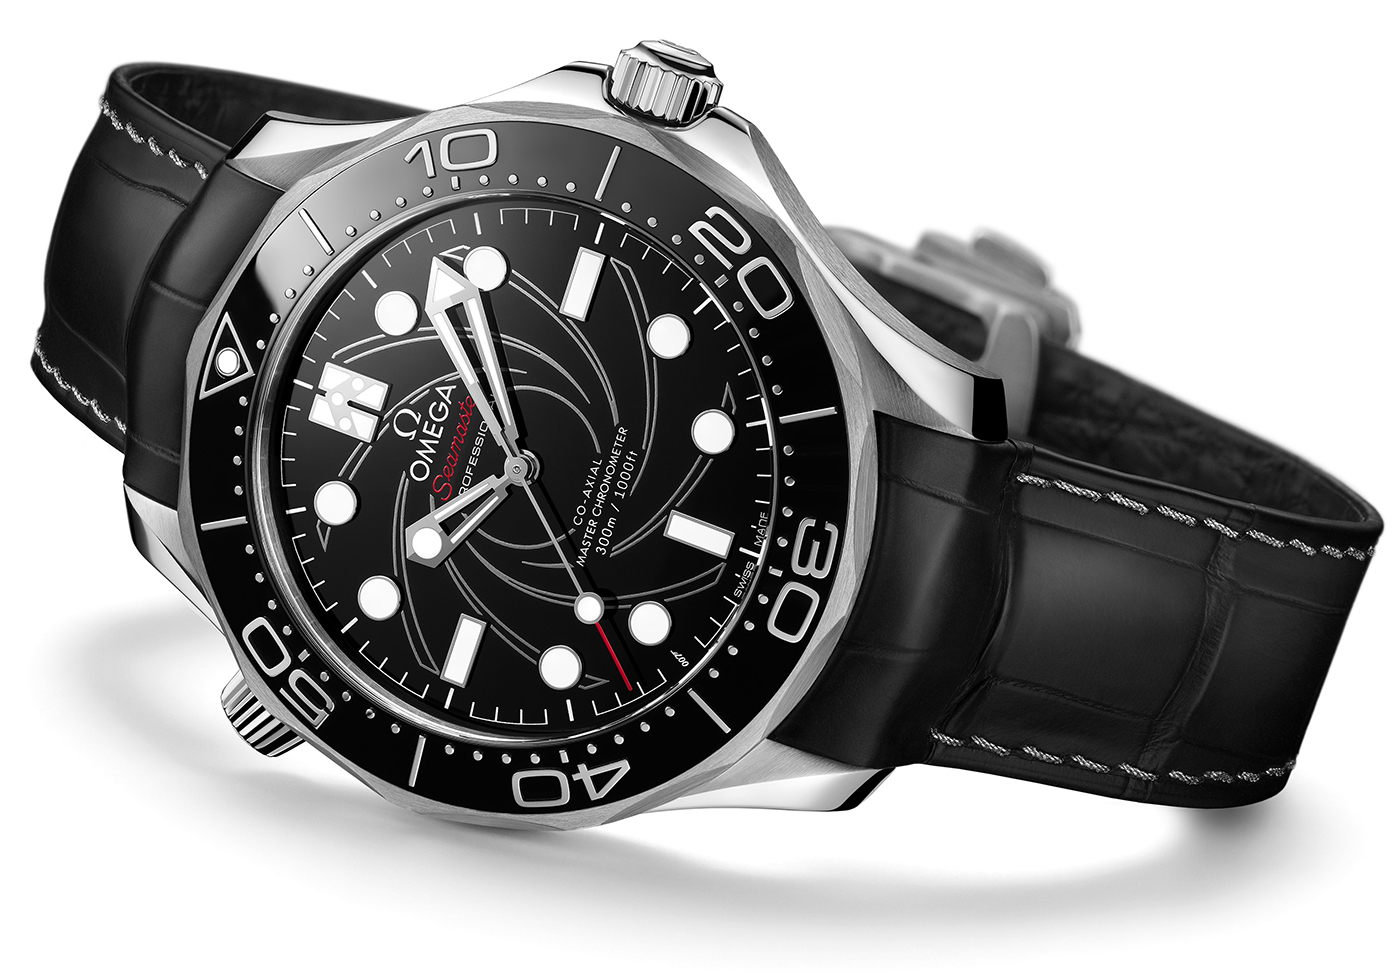 Omega Adds 007 Inspired Platinum Gold Variant To Its Seamaster Diver Line Watch Releases 